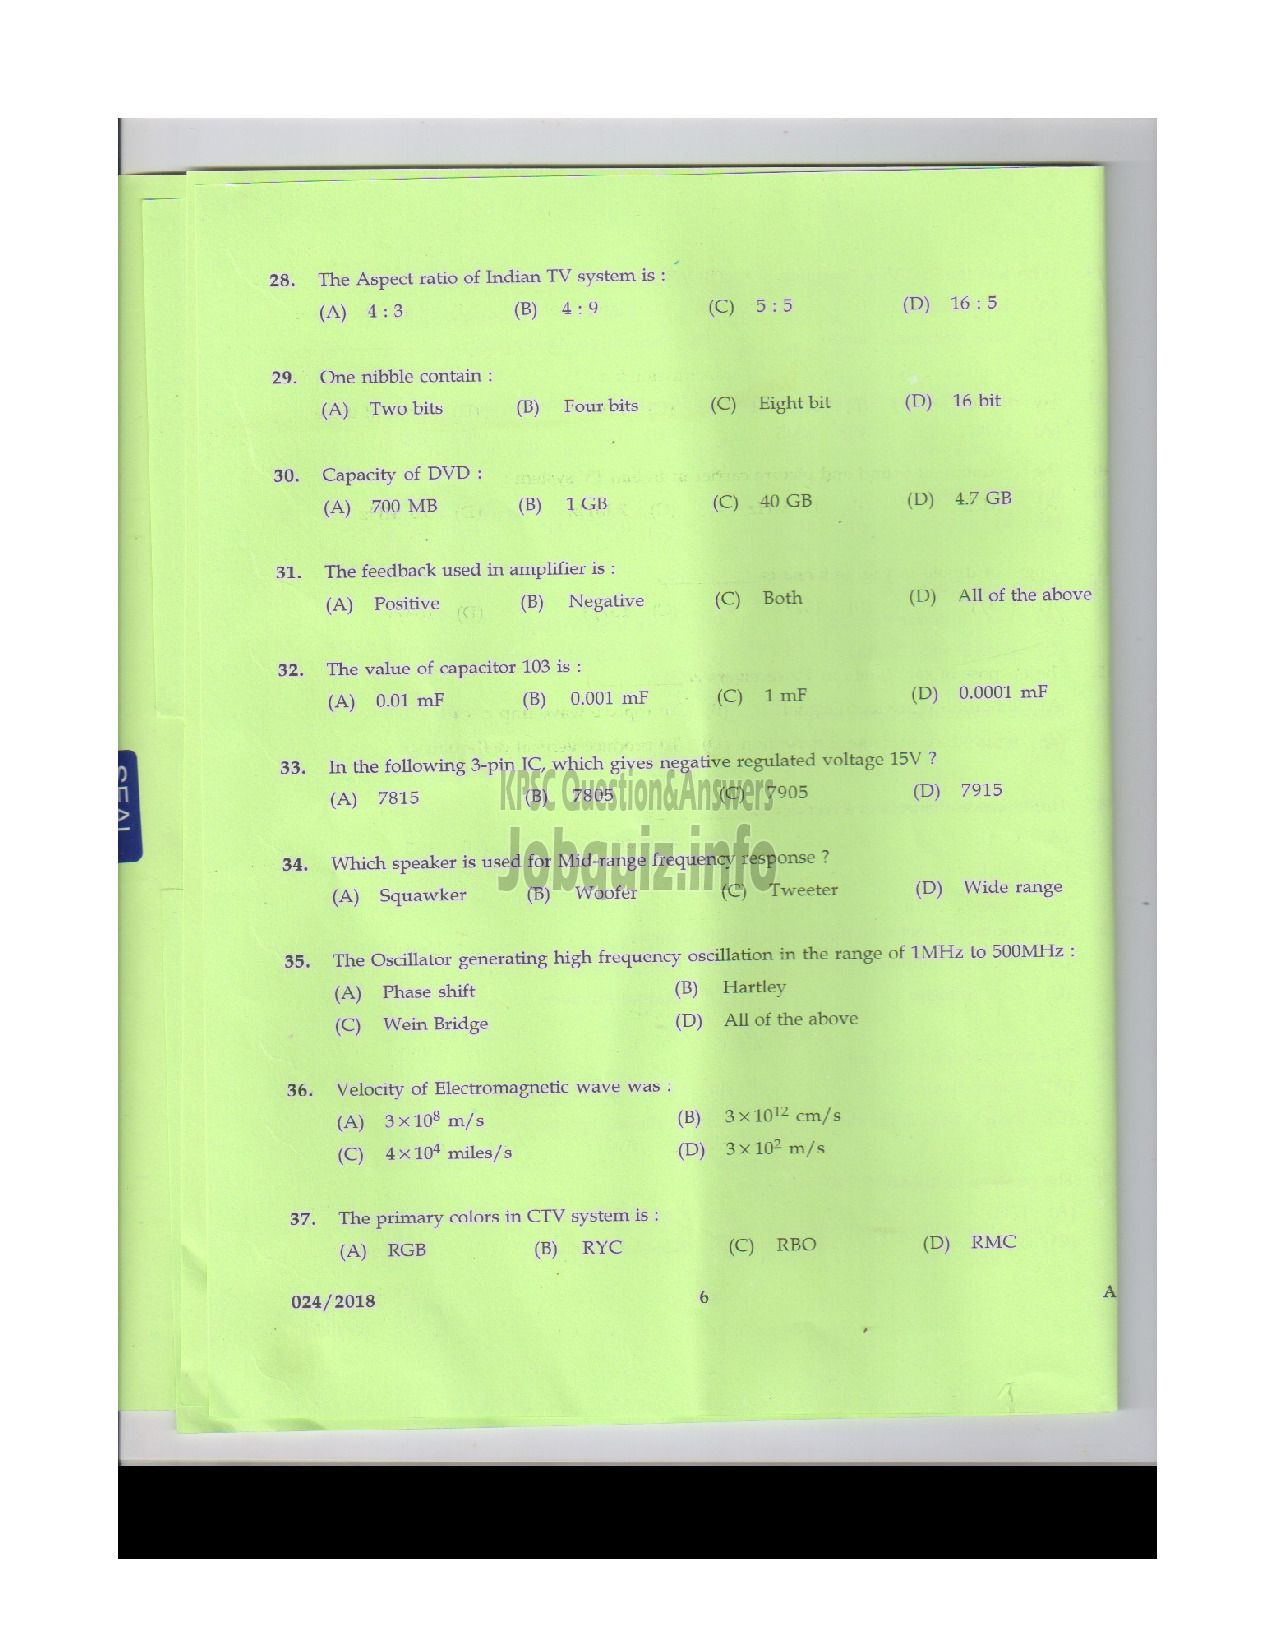 Kerala PSC Question Paper - POLICE CONSTABLE TELECOMMUNICATIONS POLICE-5